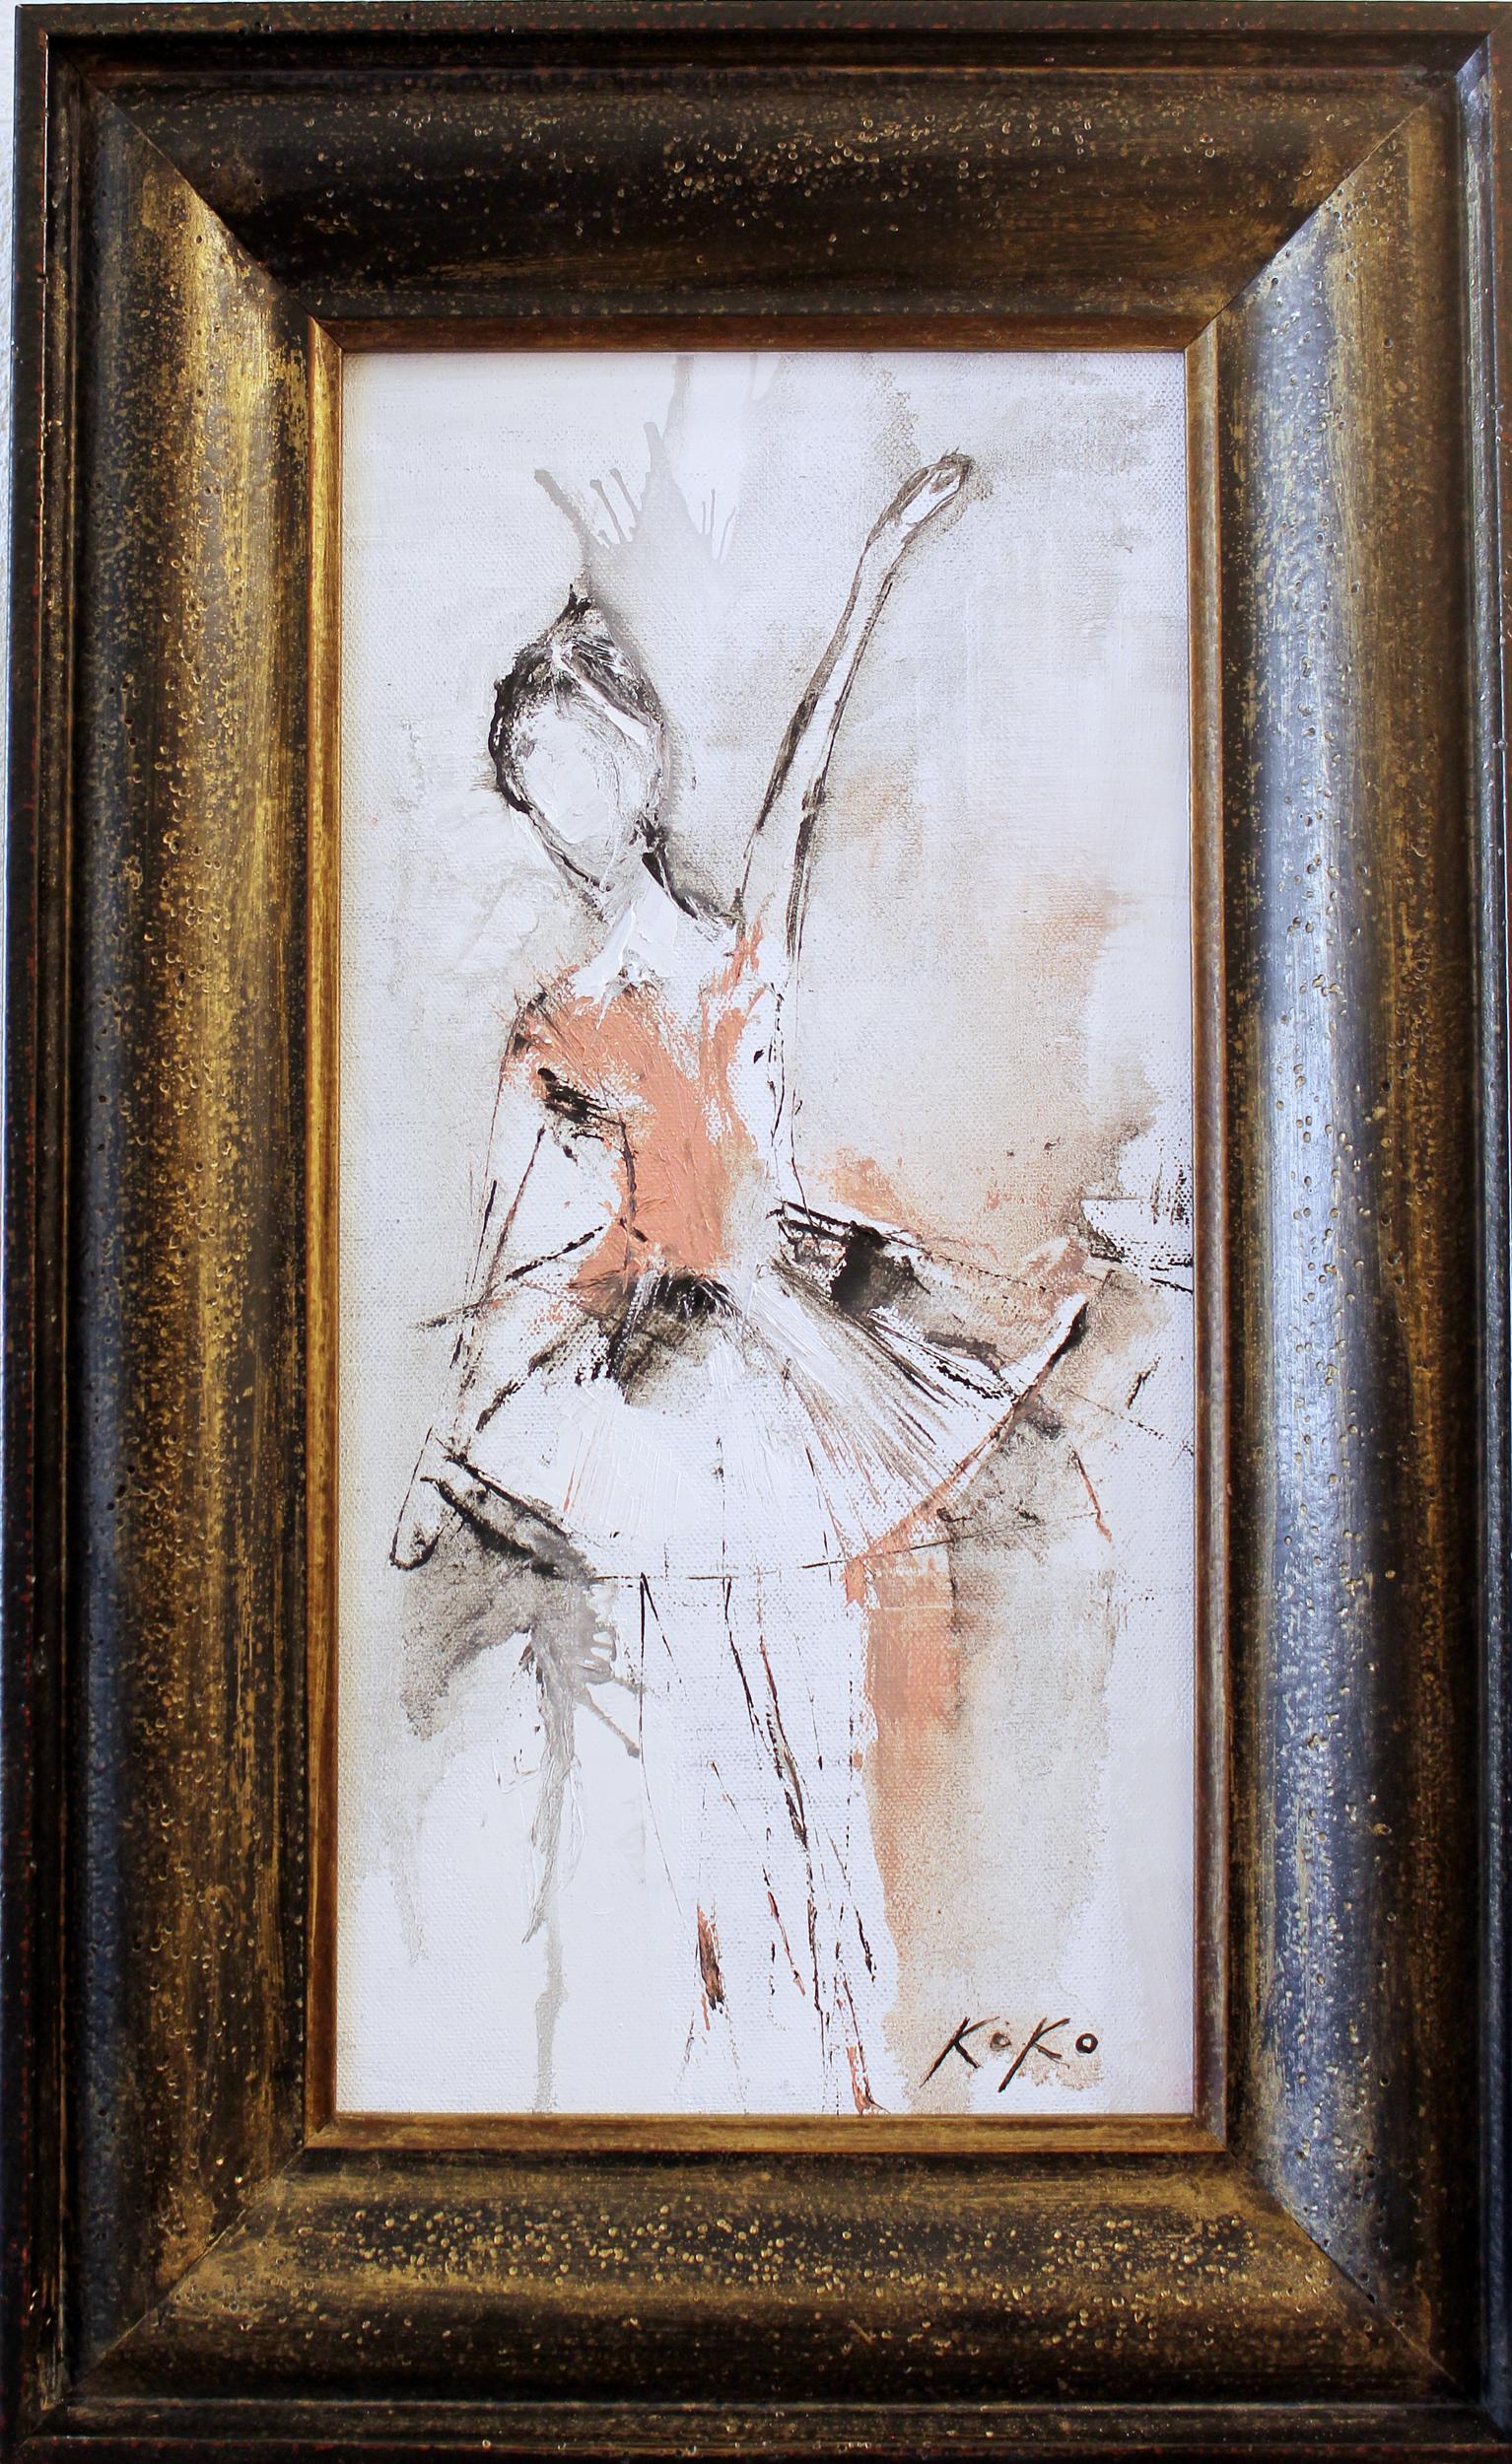 Odette, Ballet, Ballerinas, contemporary artist - Abstract Expressionist Painting by KOKO HOVAGUIMIAN